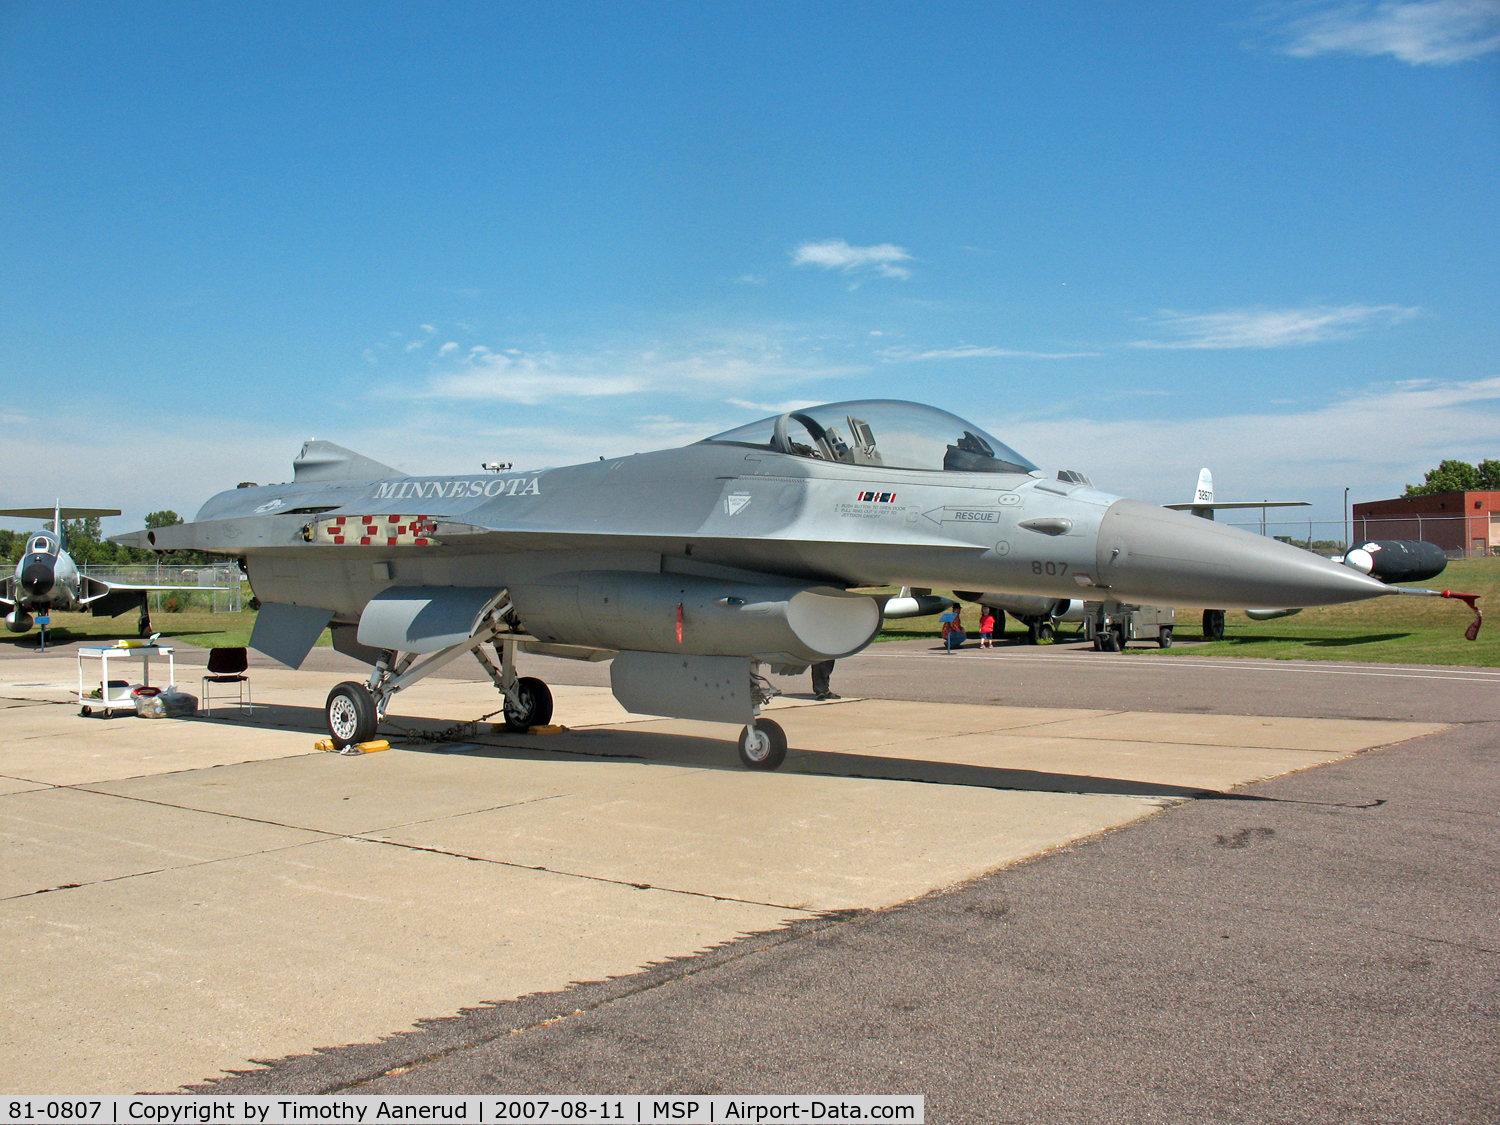 81-0807, General Dynamics F-16A/ADF Fighting Falcon C/N 61-488, General Dynamics F-16A Fighting Falcon Block 15H, Minnesota Air National Guard Museum